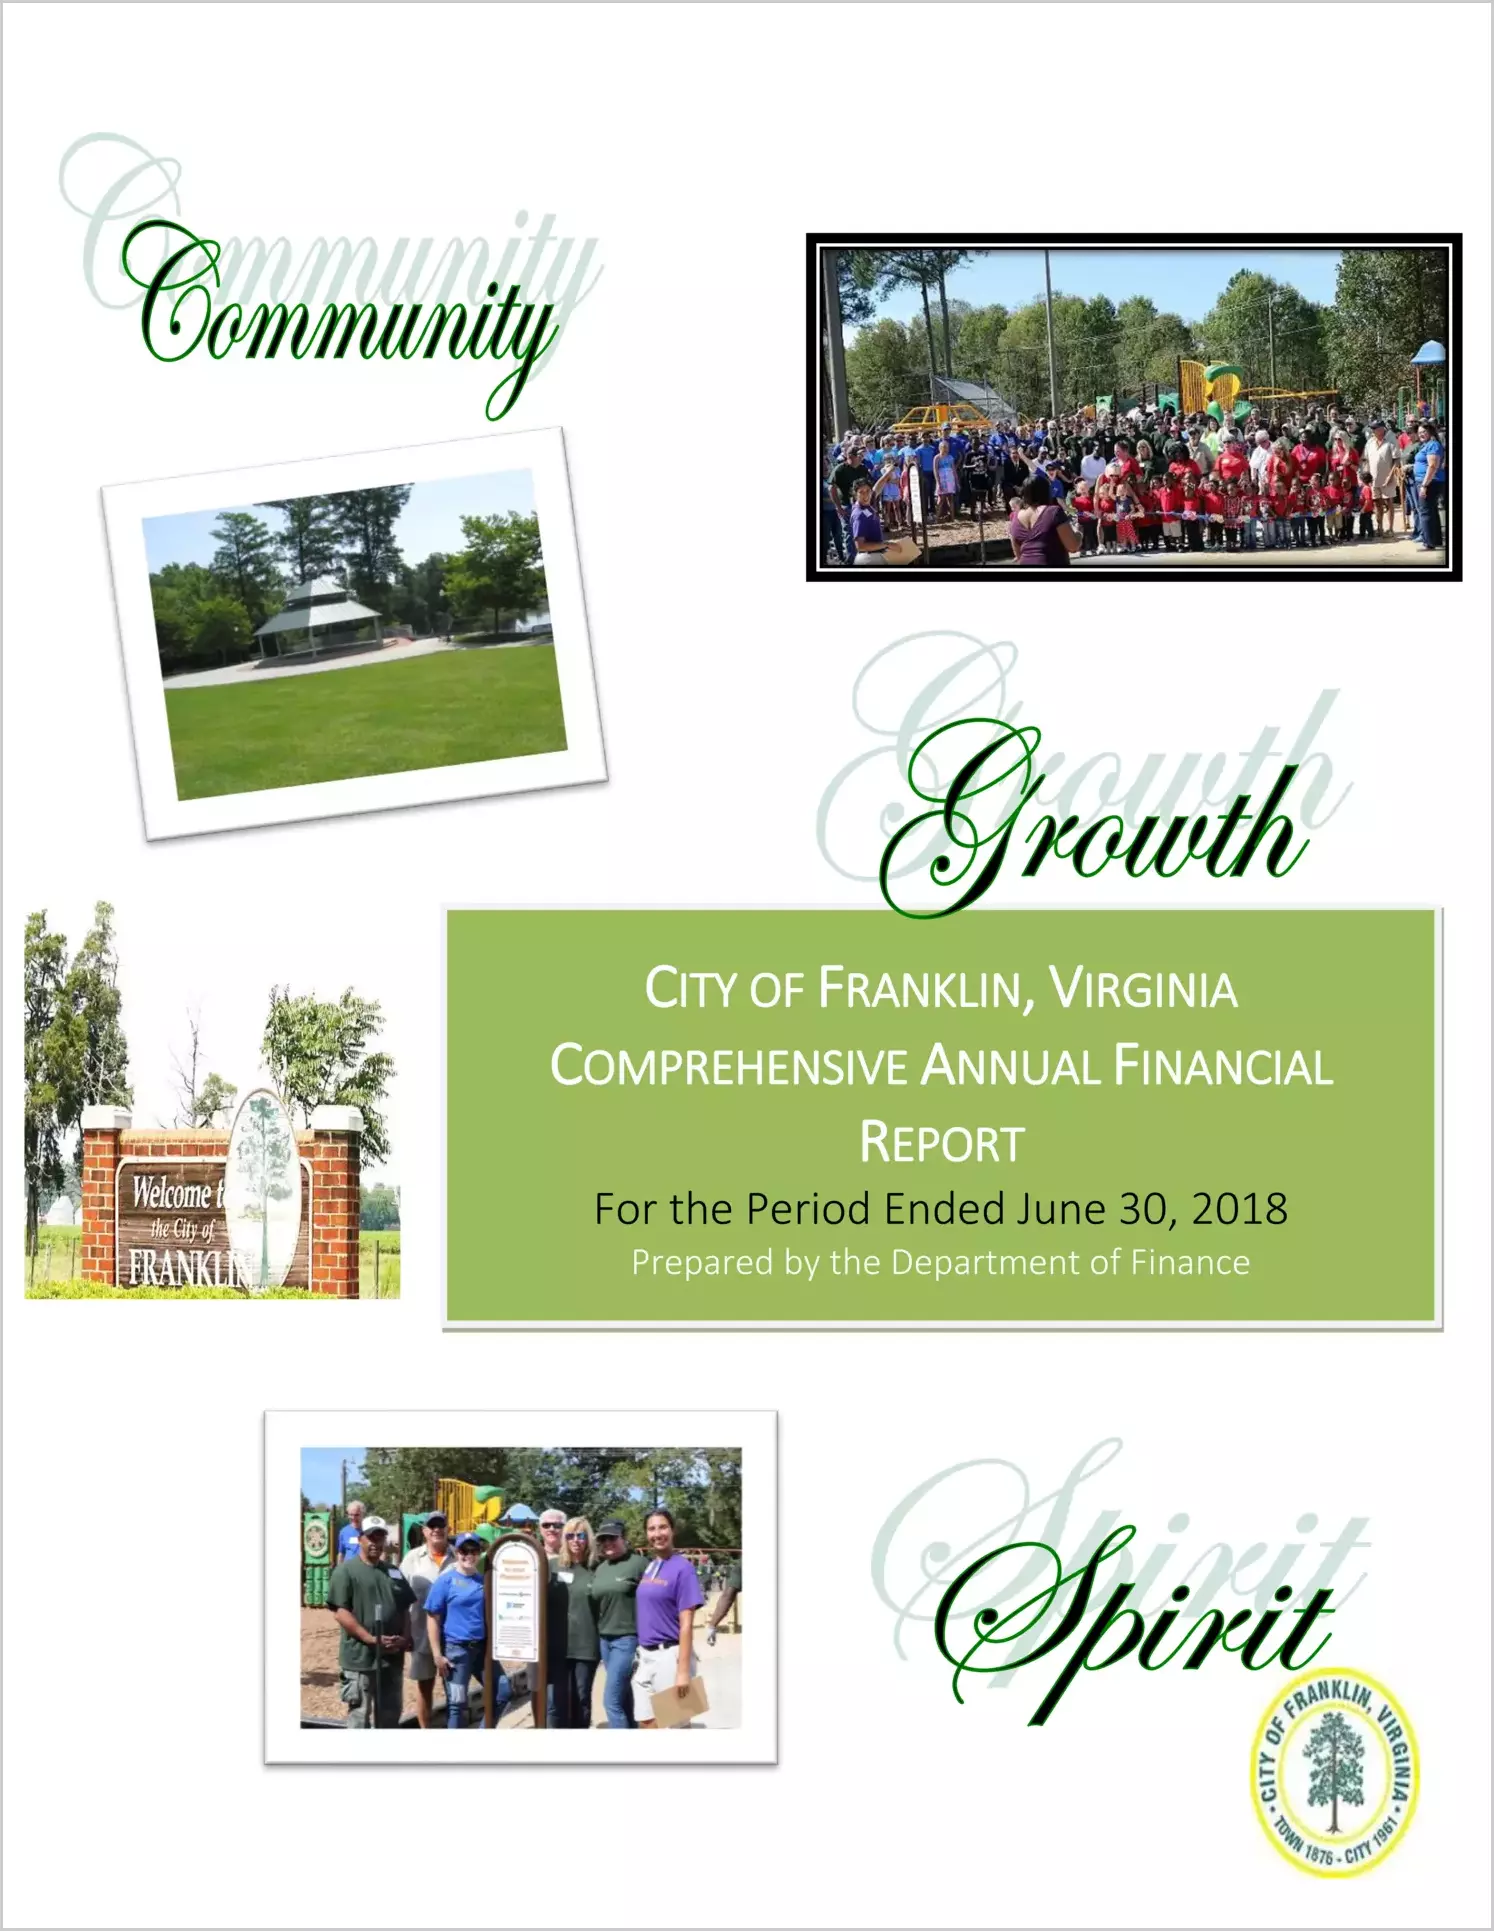 2018 Annual Financial Report for City of Franklin